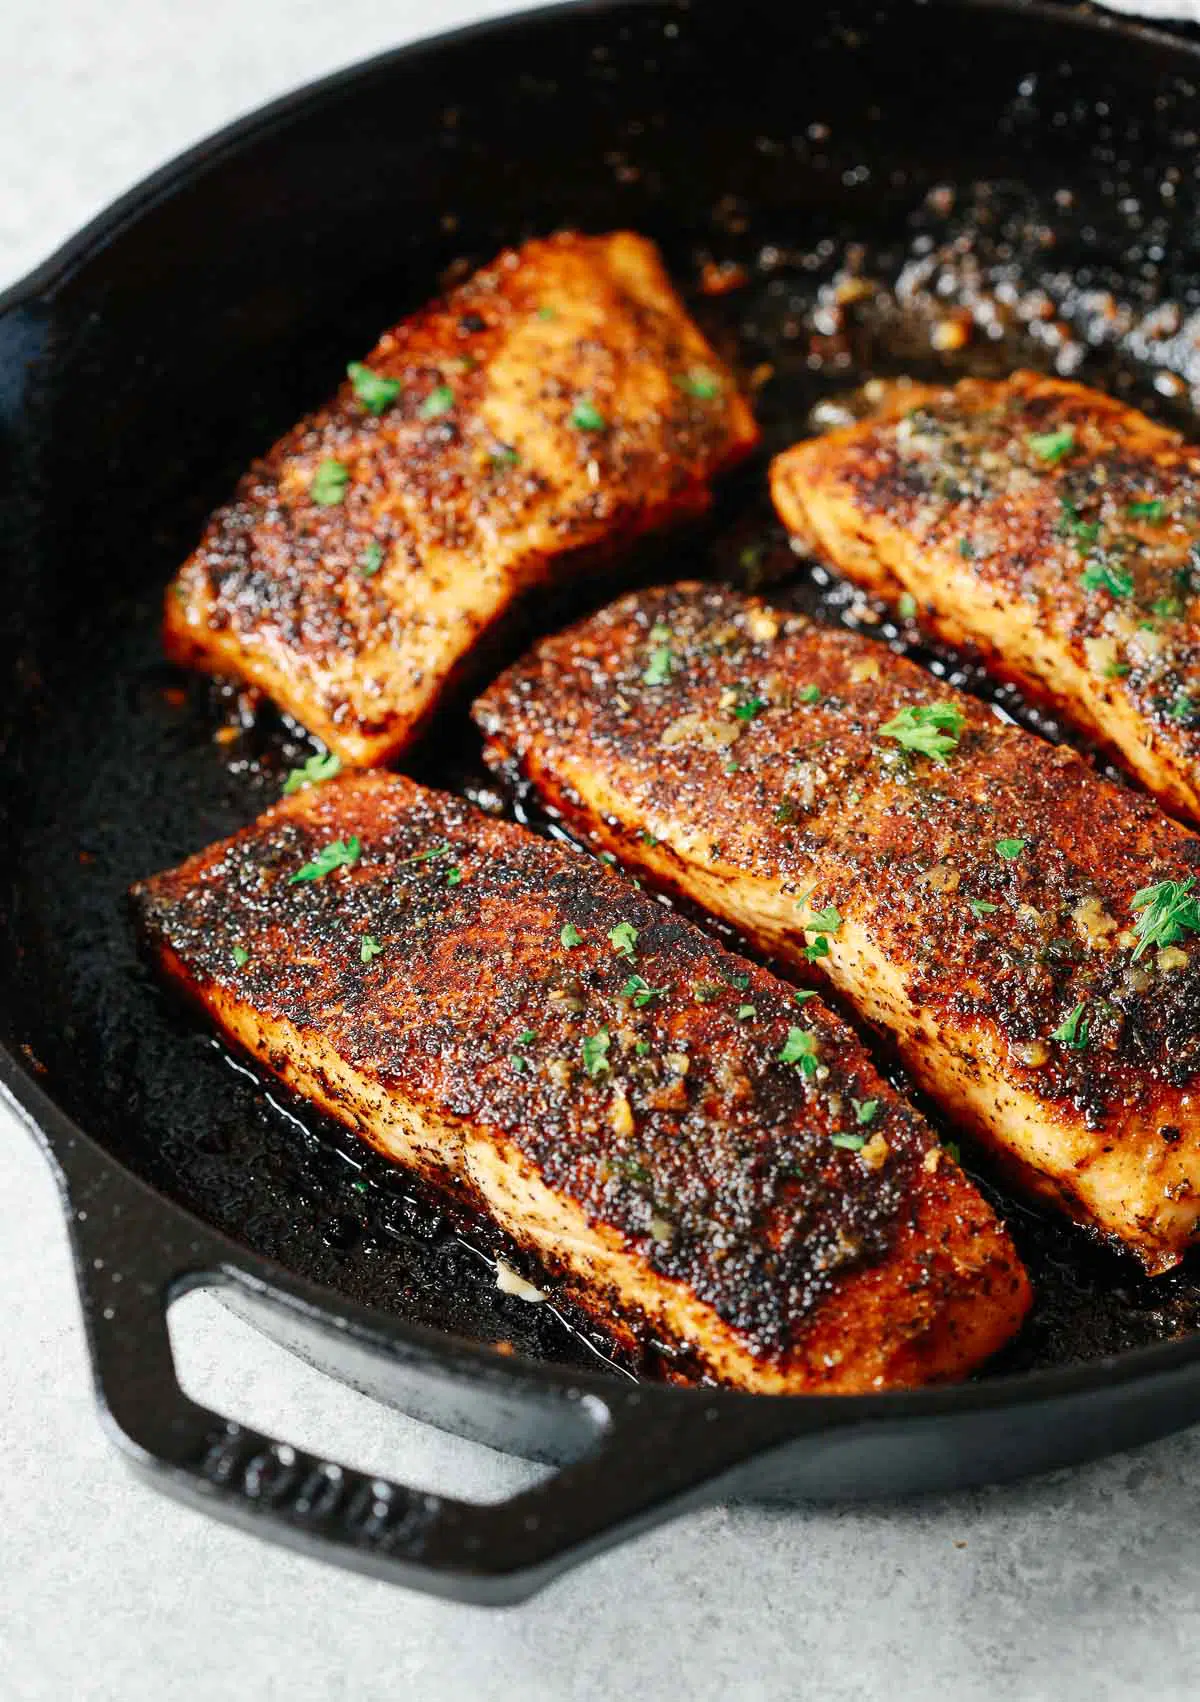 4 blackened salmon fillets in a cast iron skillet